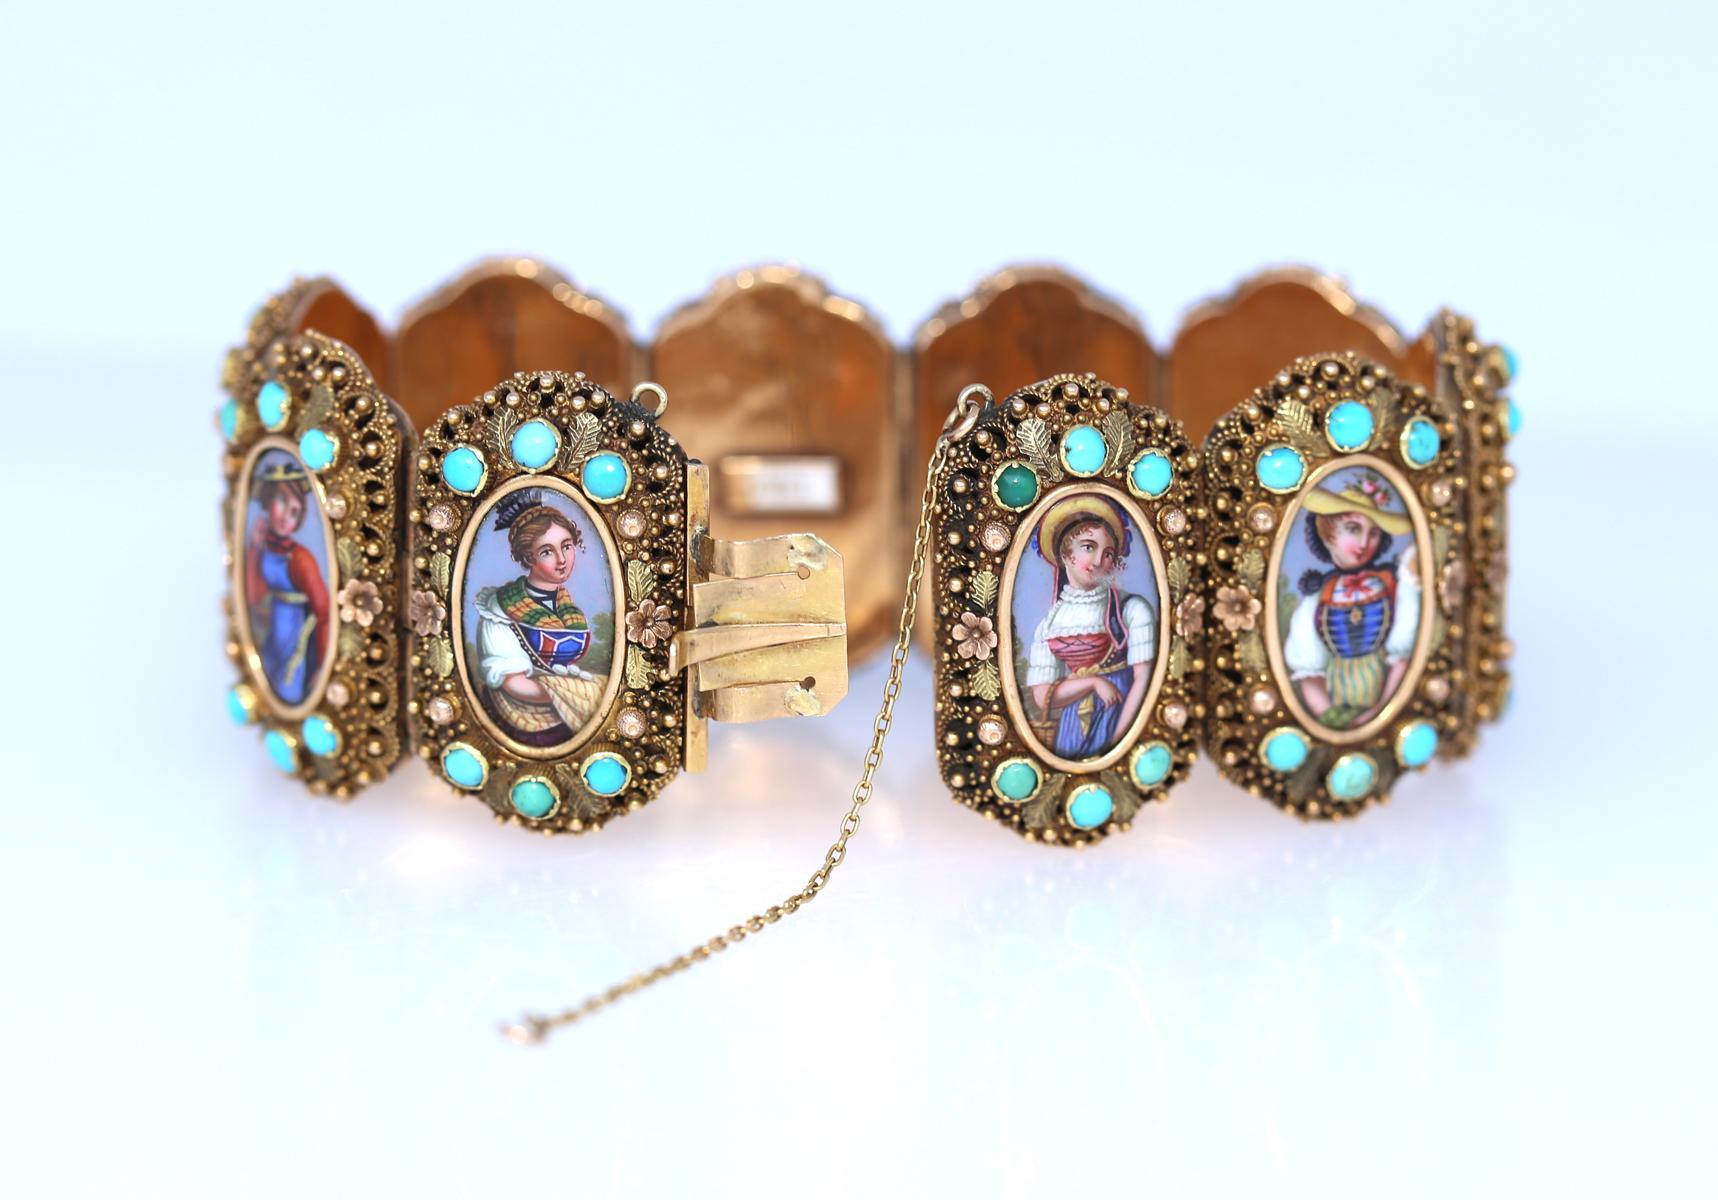  Locket Gold Bracelet Swiss Cantons Hand-Painted Ladies Turquoise, 1860 10